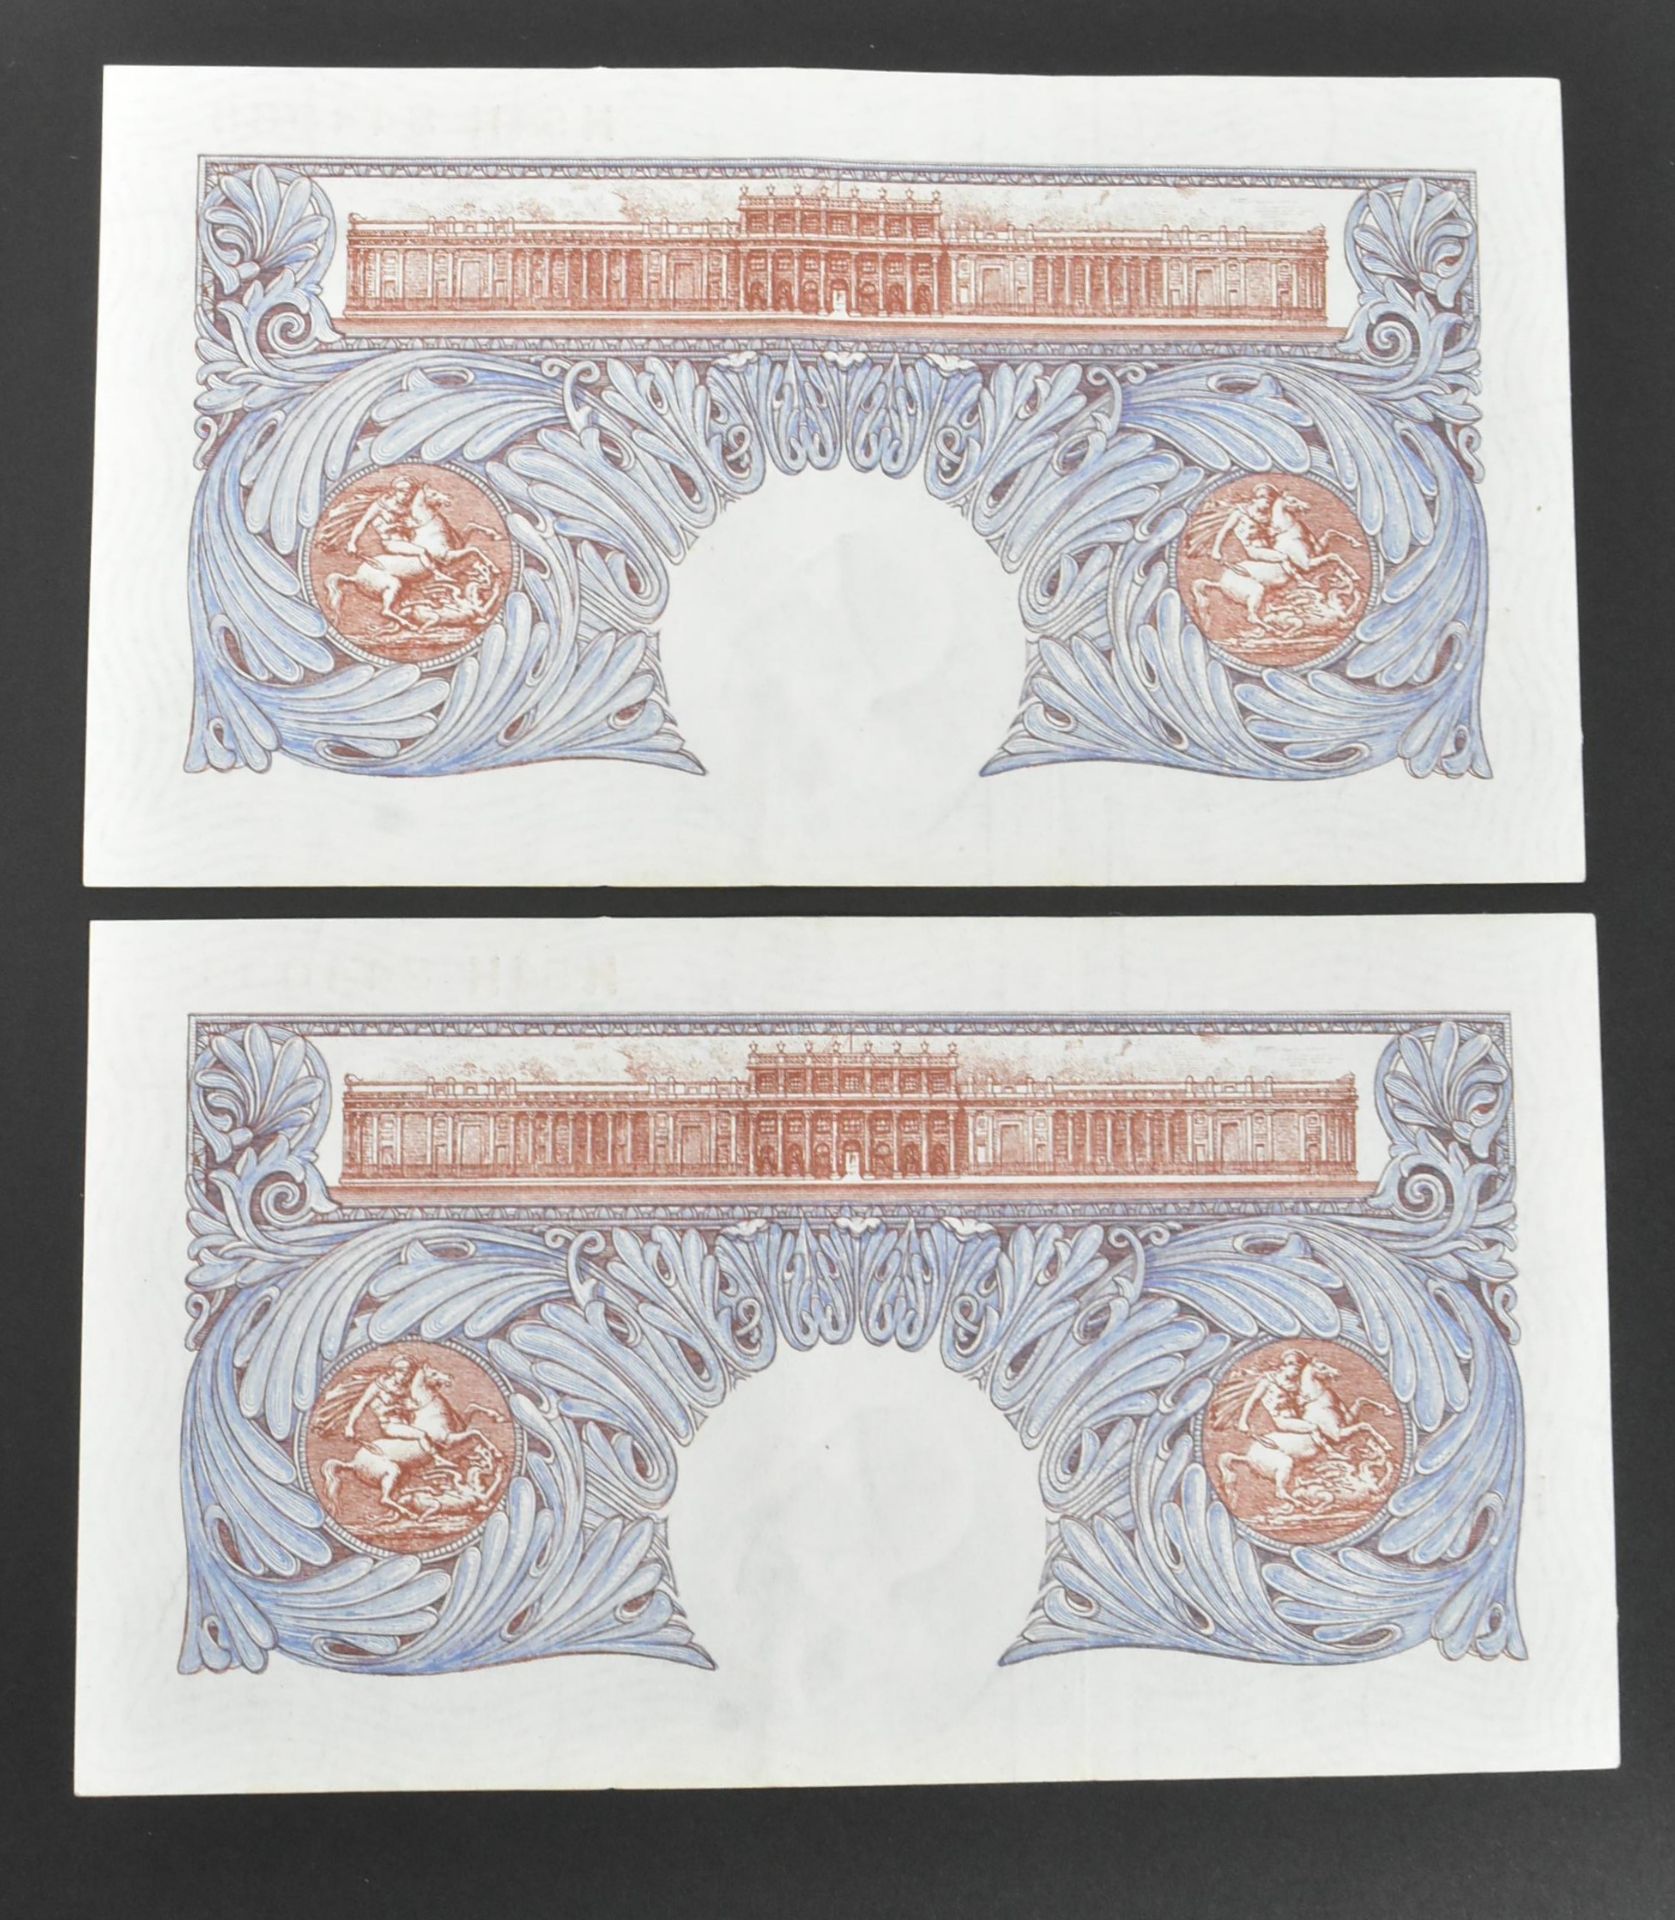 COLLECTION BRITISH UNCIRCULATED BANK NOTES - Image 41 of 61